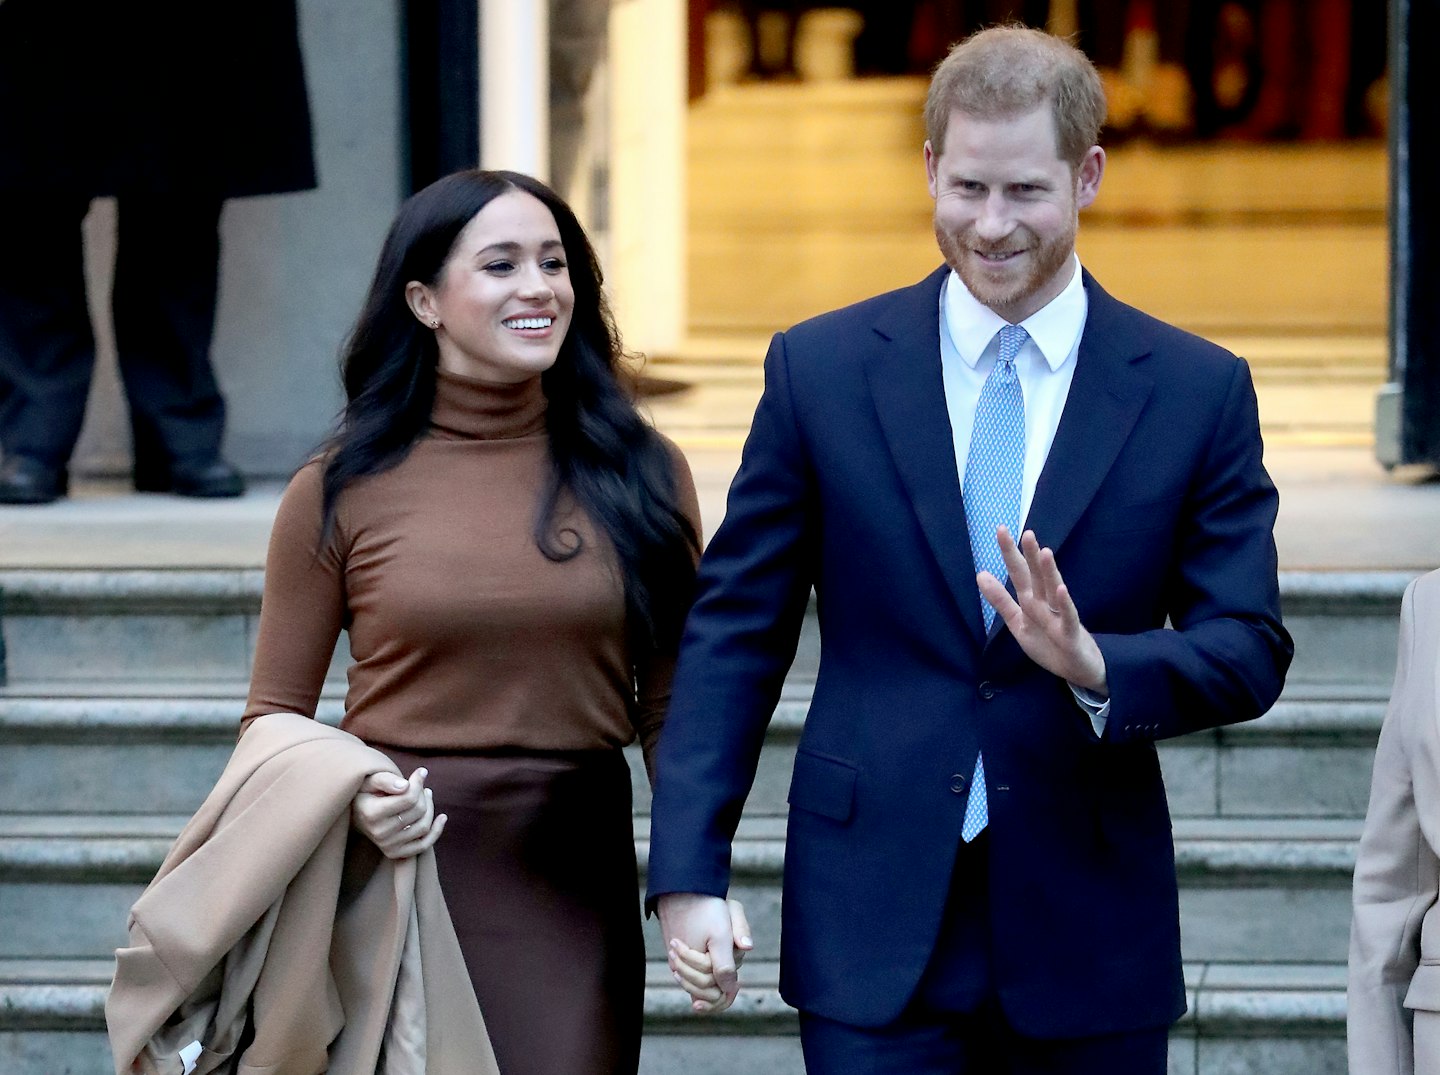 January 2019: Harry and Meghan announce they are stepping down from senior royal duties